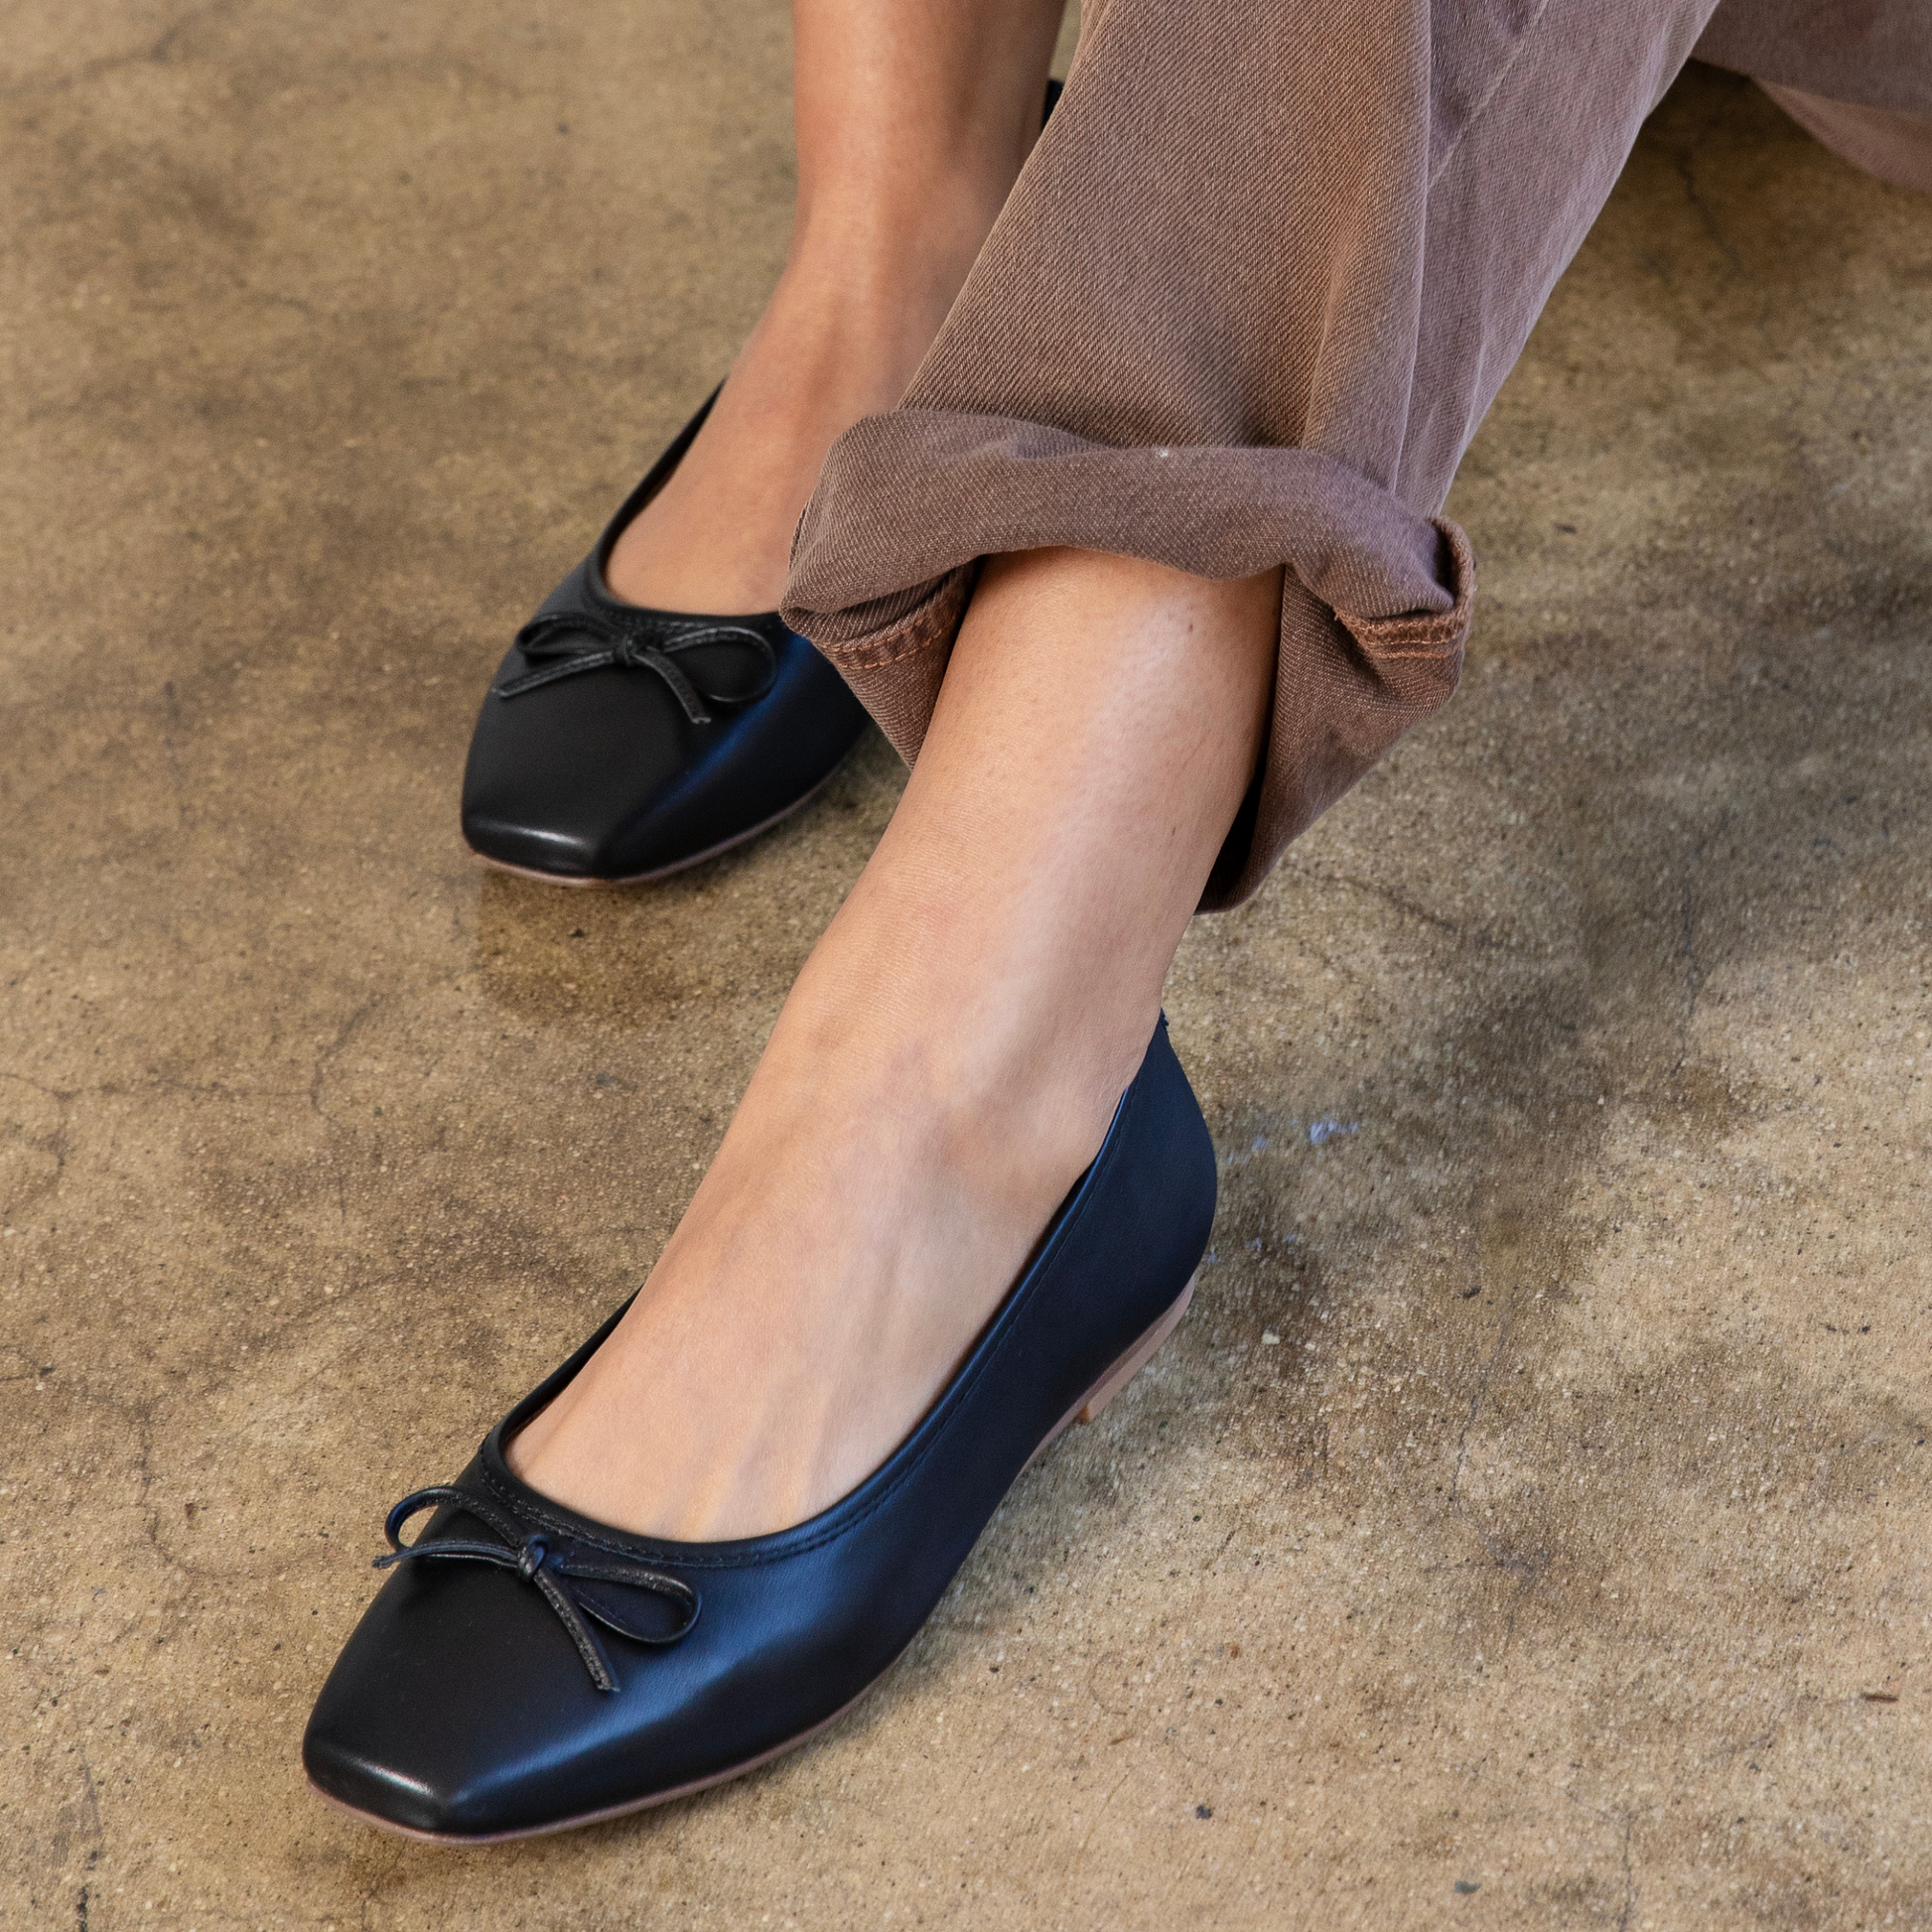 20 Best Ballet Flats That Are Stylish and Comfortable in 2023